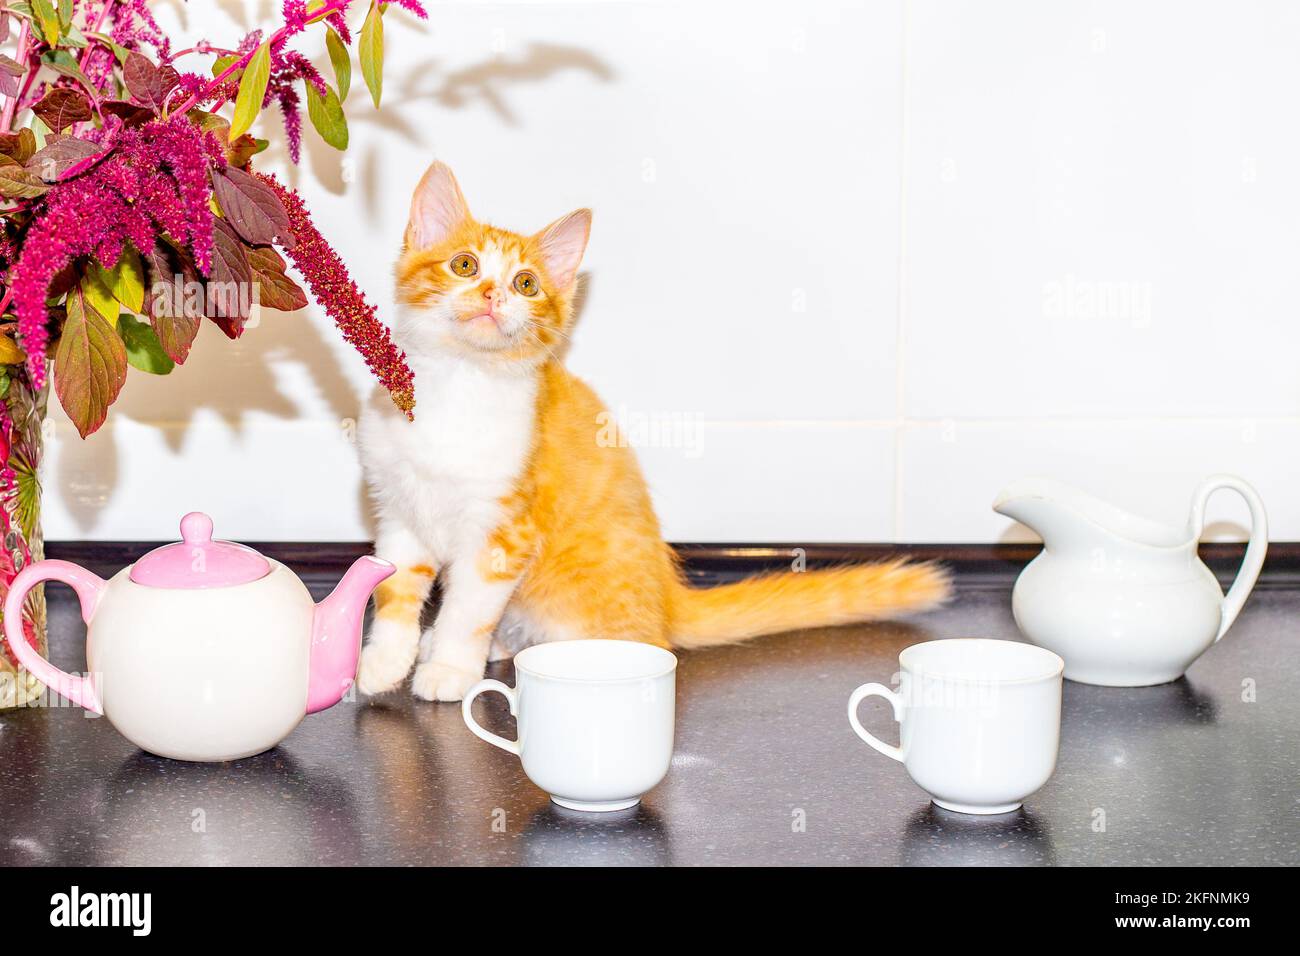 Ginger kitten in the kitchen on the table next to the cups and teapot. Pets in the home interior. Stock Photo